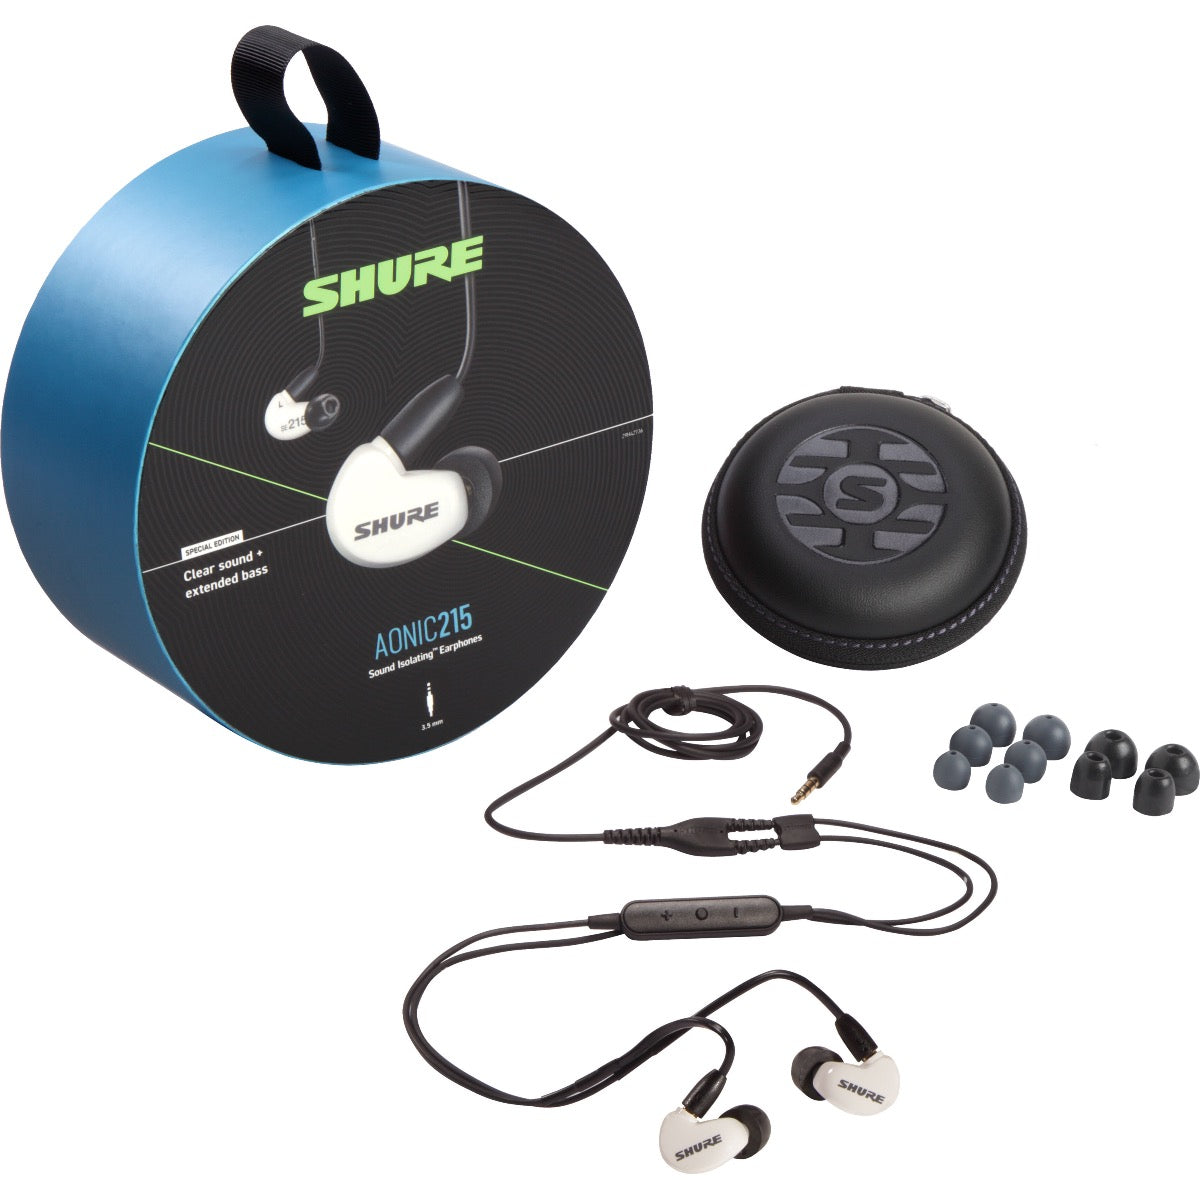 3/4 view of Shure AONIC 215 Sound Isolating Earphones - White packaging and components showing top, front and left sides